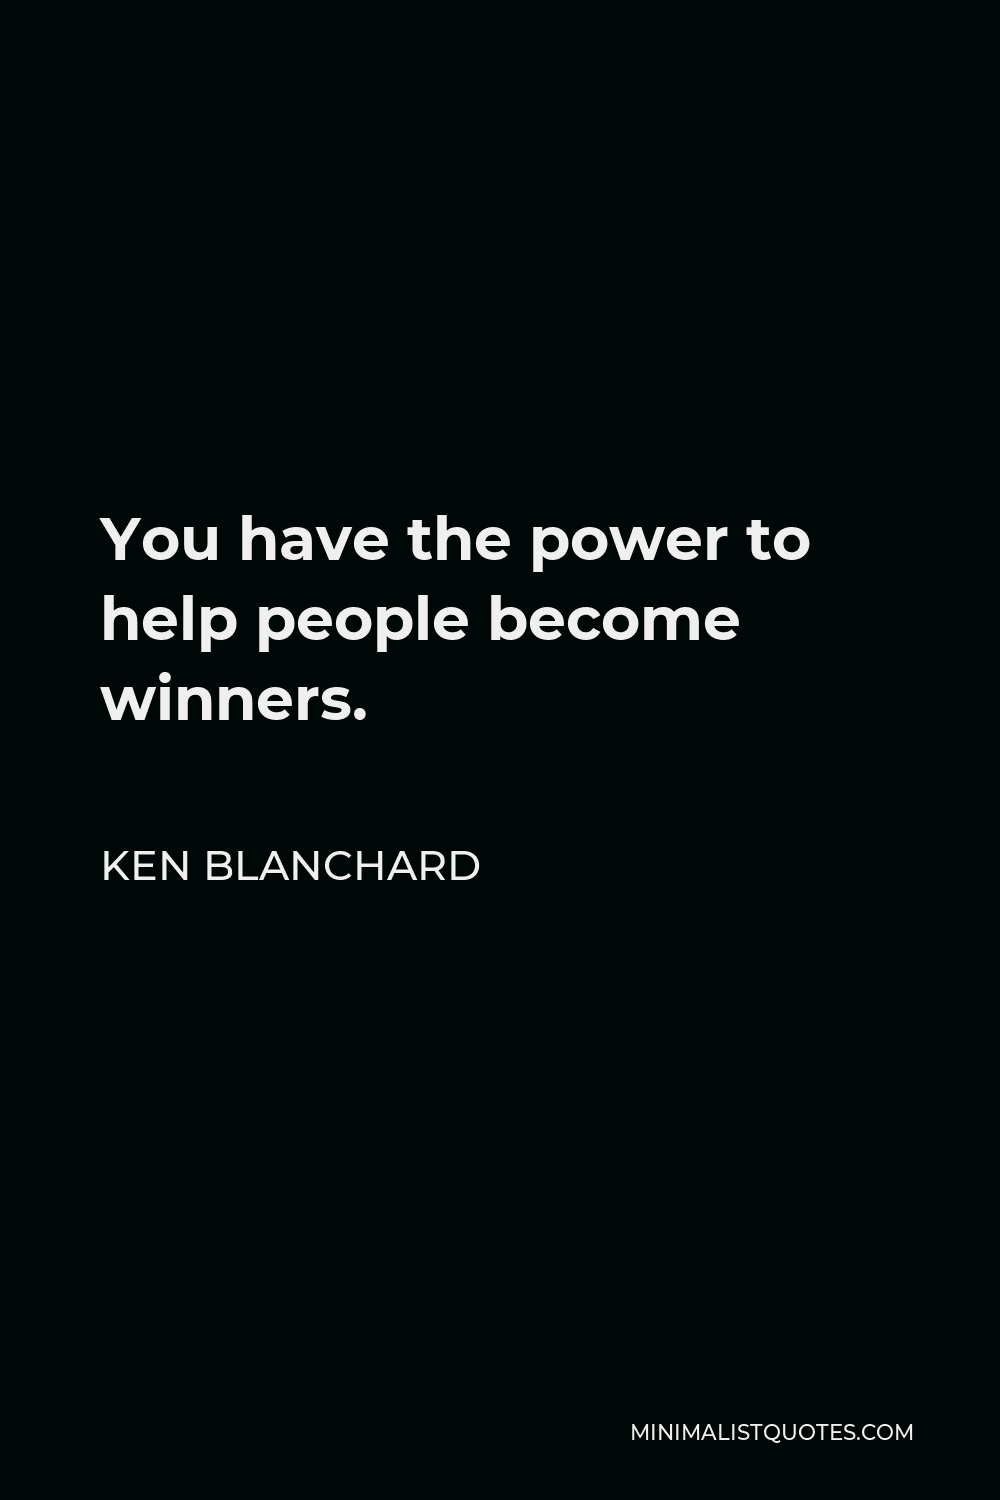 Ken Blanchard Quote - You have the power to help people become winners.